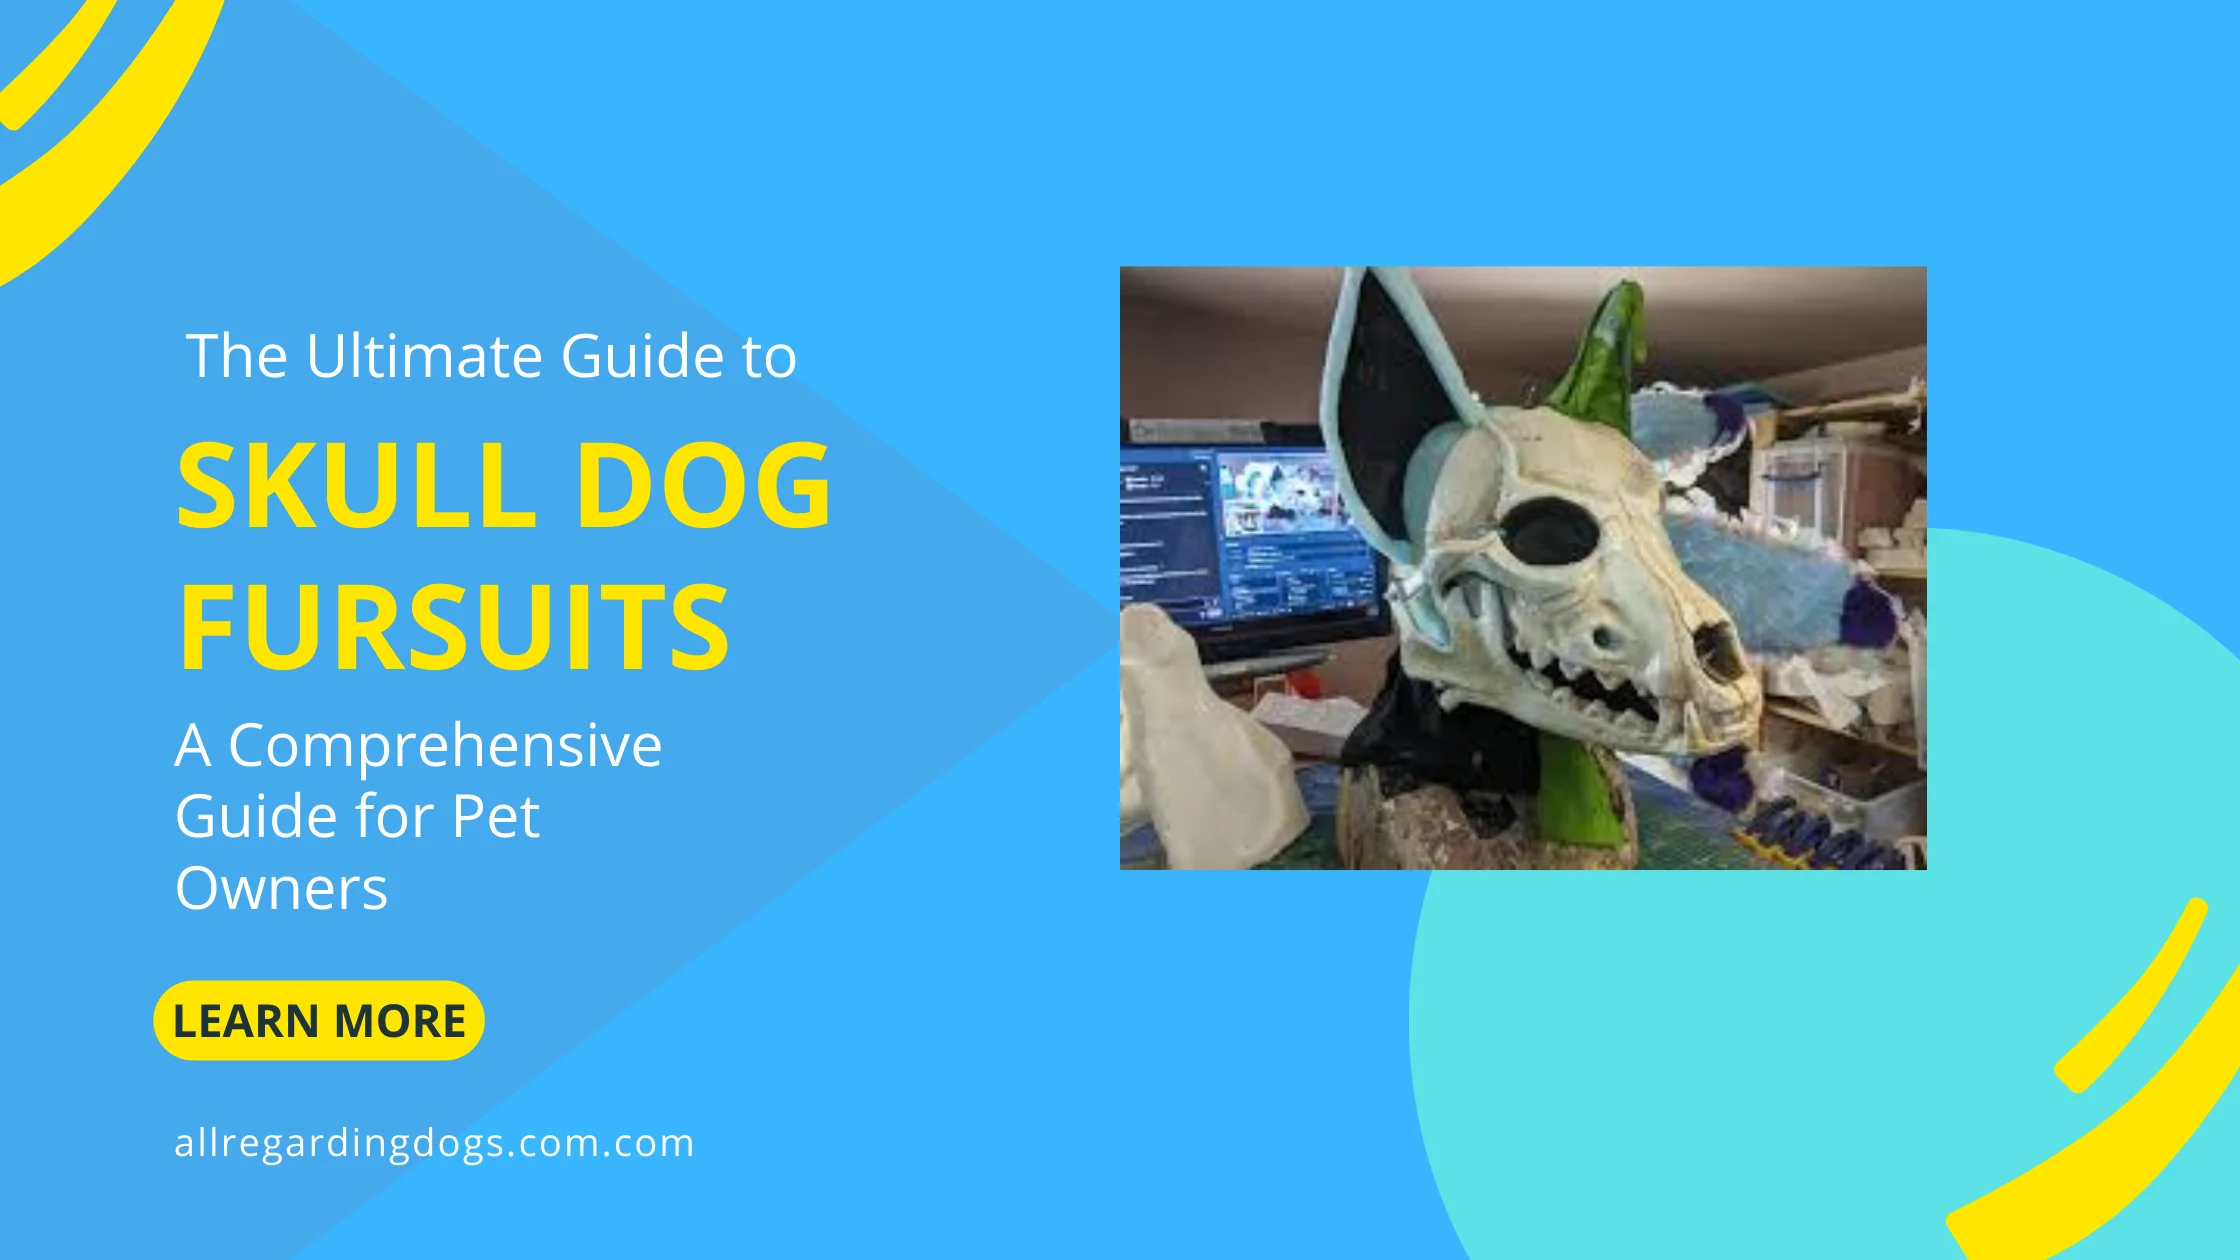 The Ultimate Guide to Skull Dog Fursuits: A Comprehensive Guide for Pet Owners